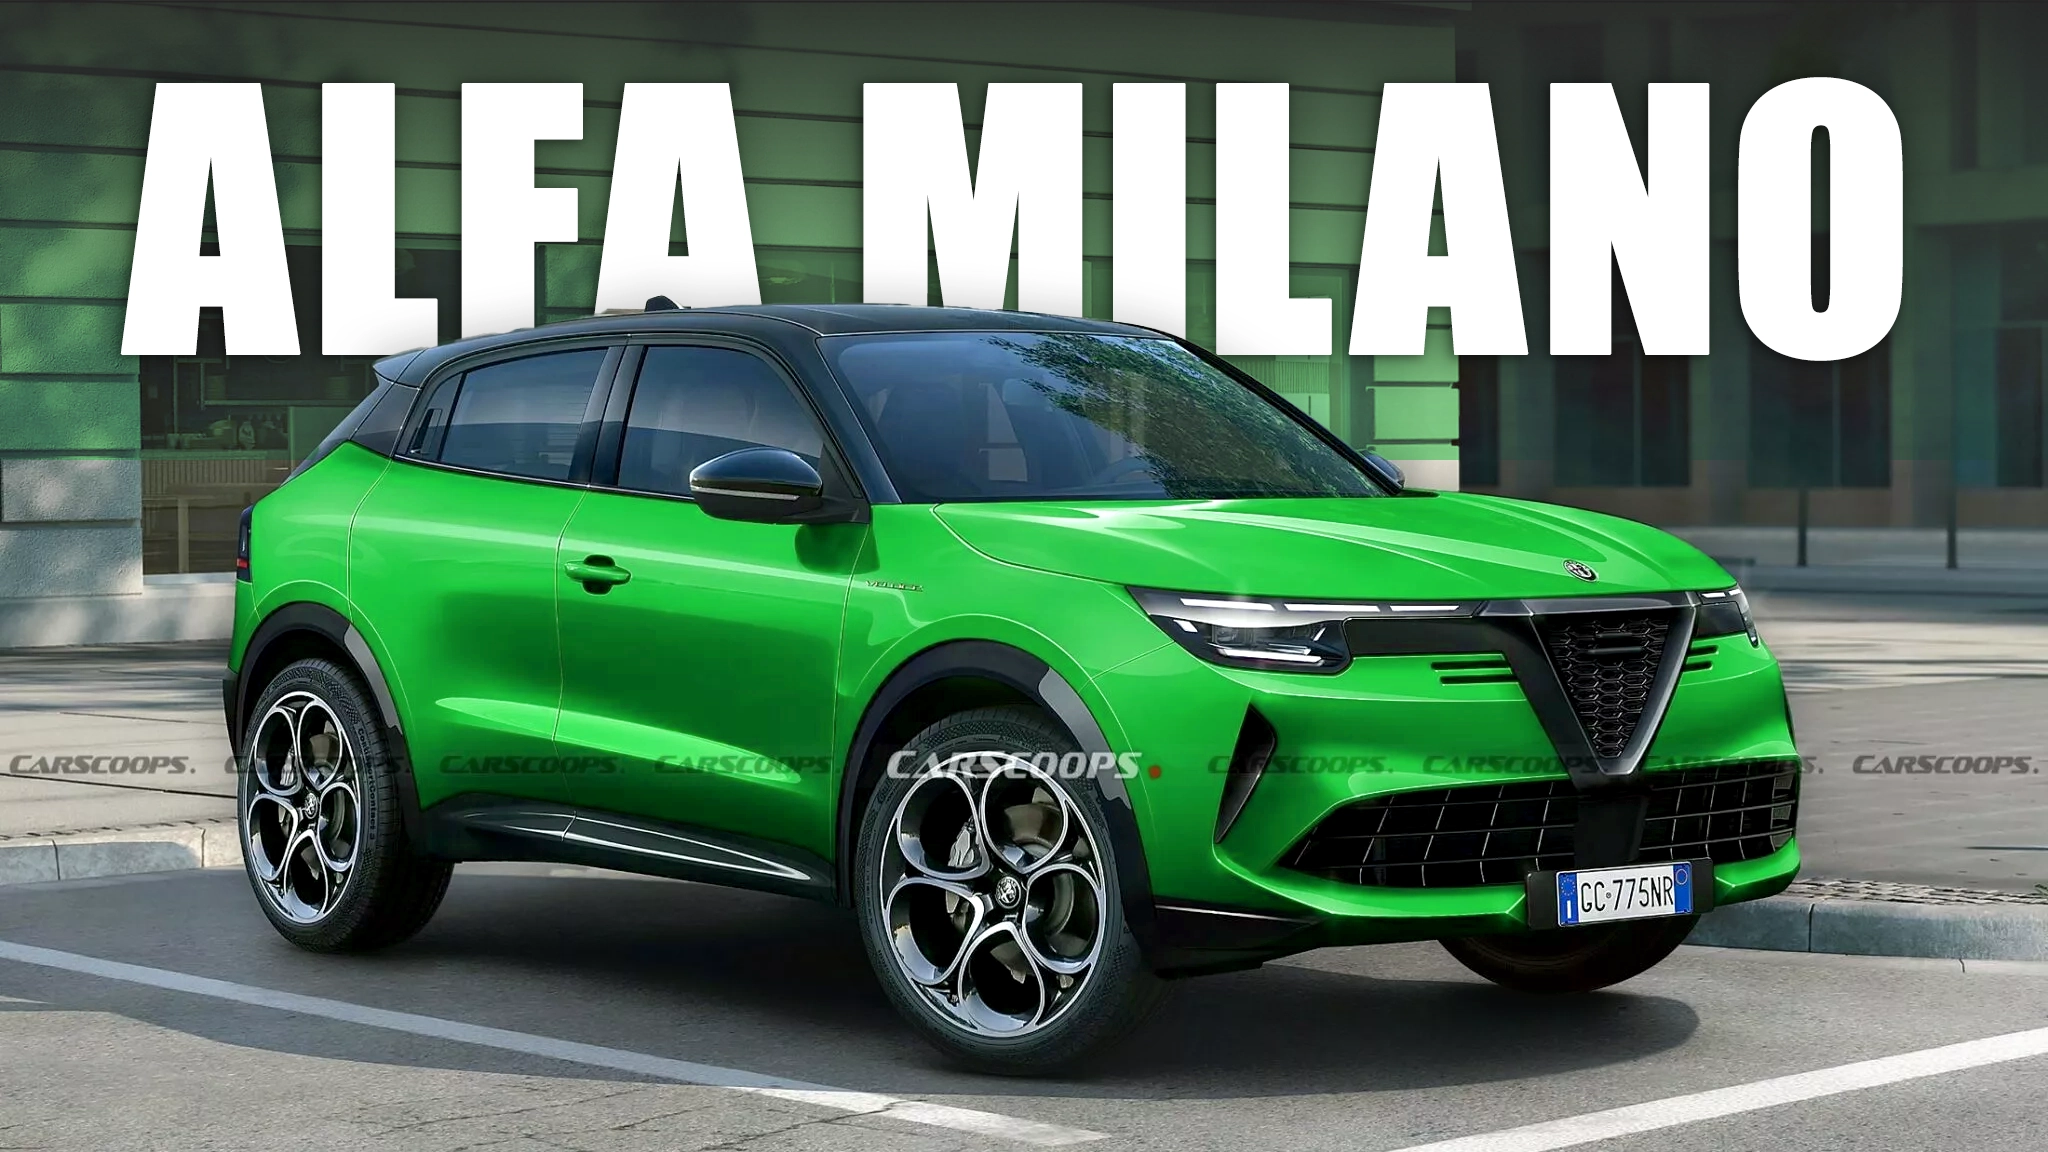 Alfa Romeo Milano Debuts In April, Here’s What We Know About The New